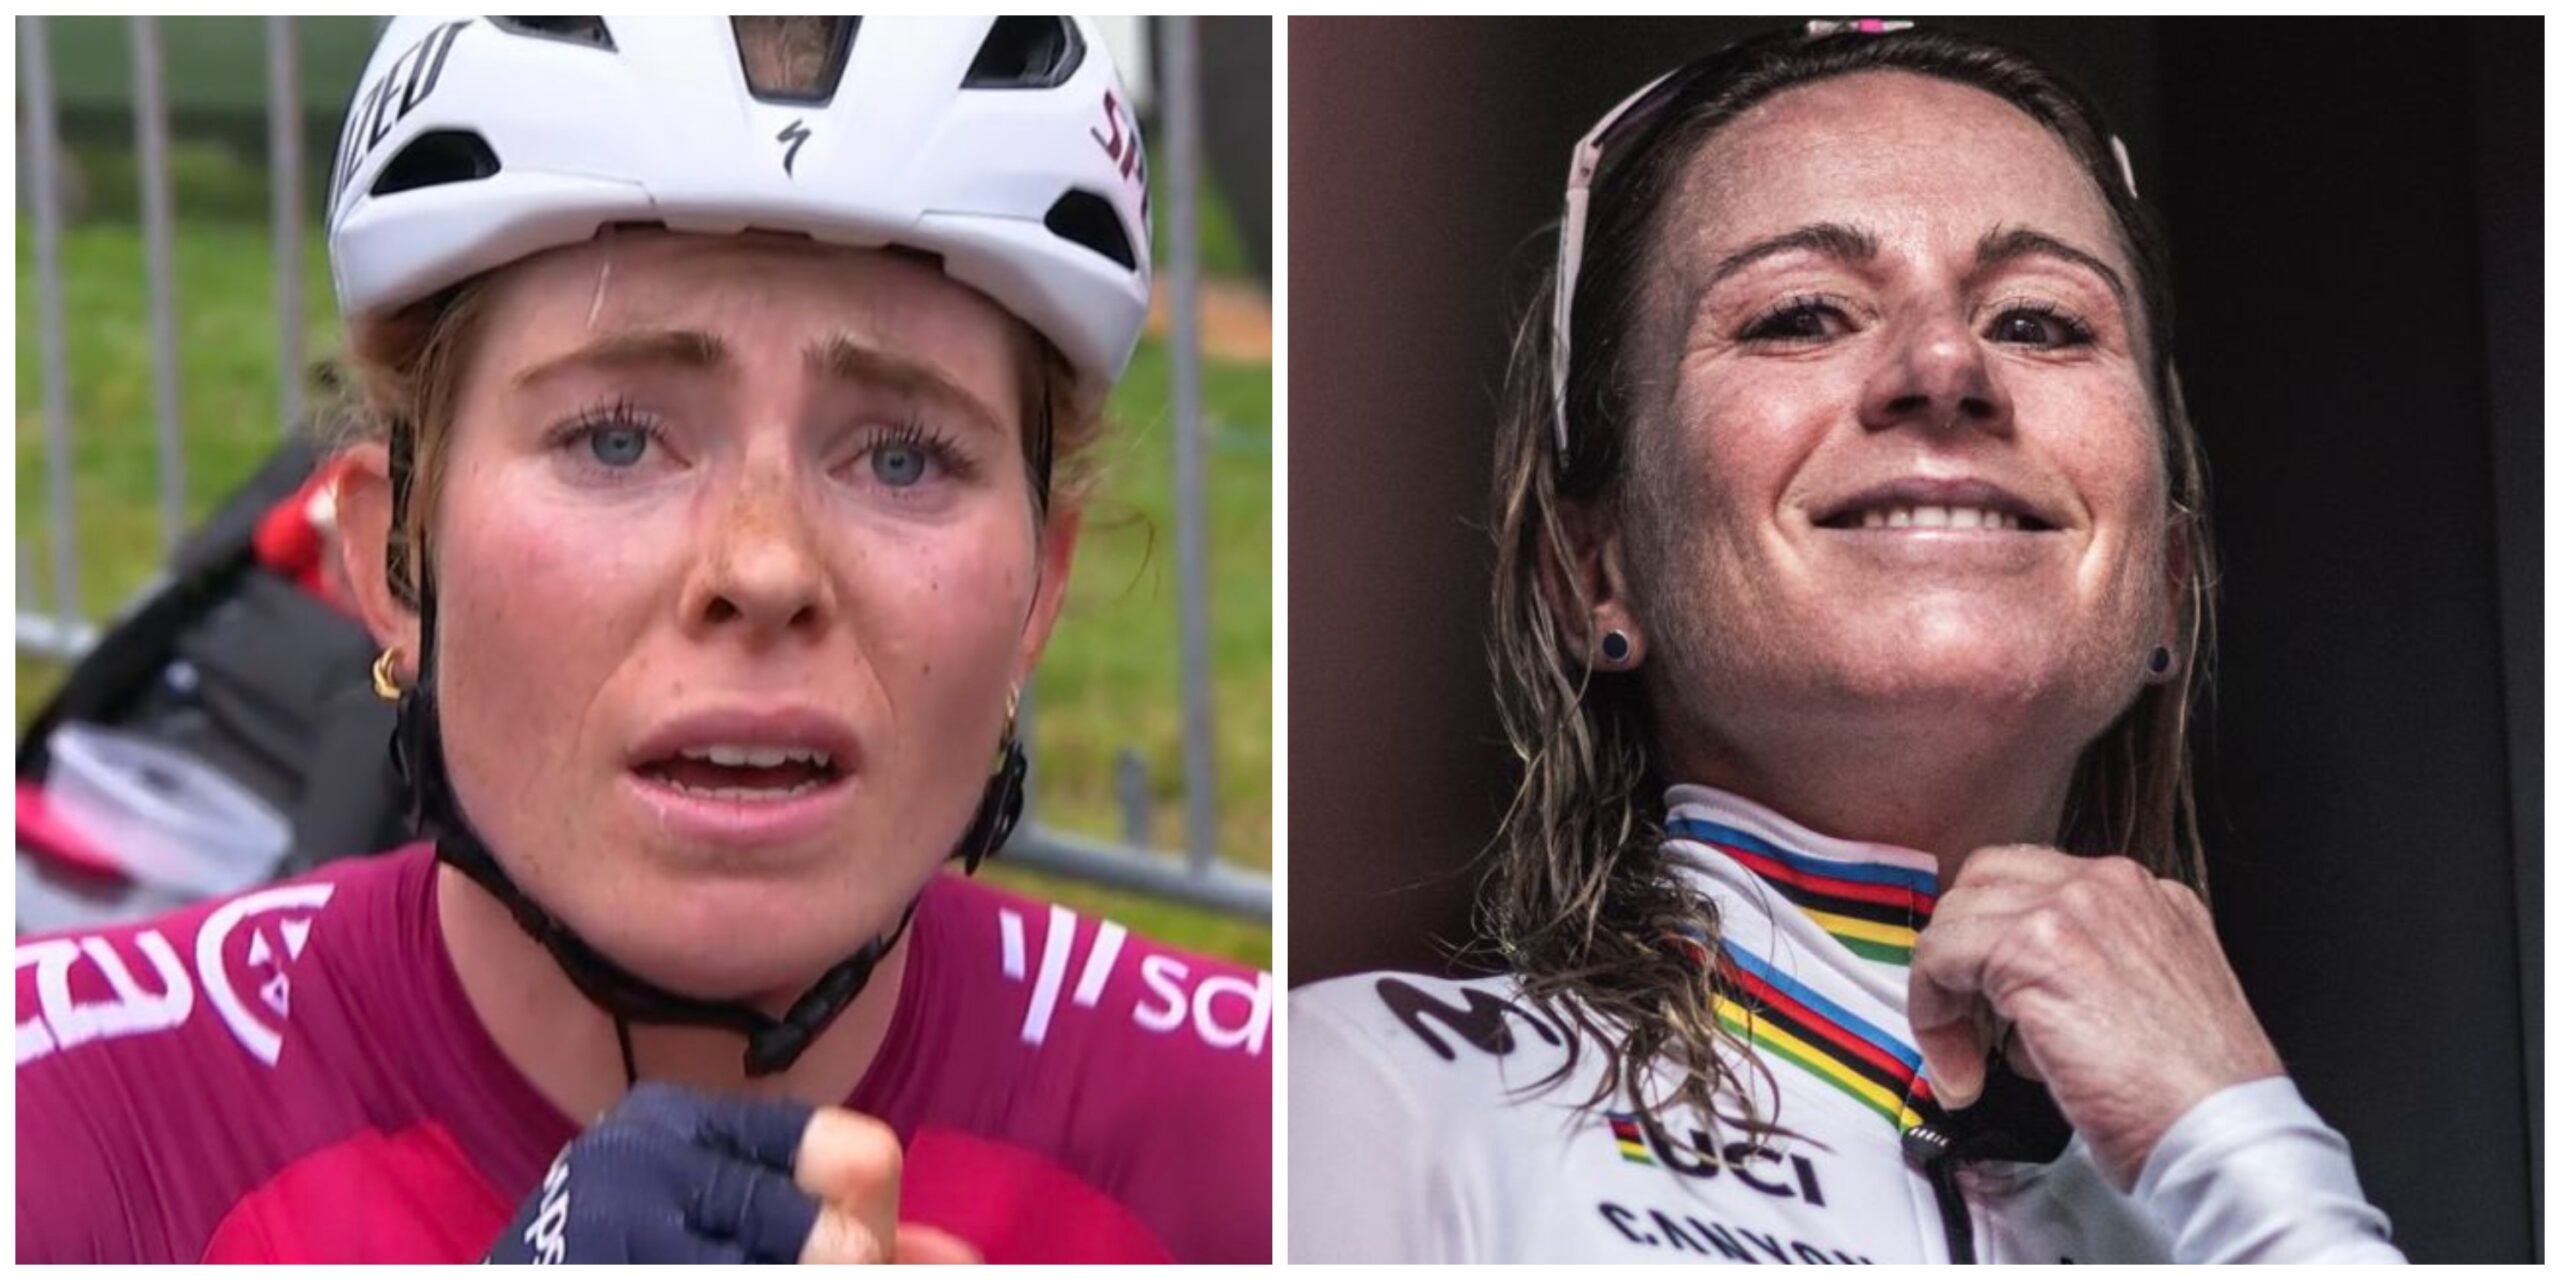 Van Vleuten “laughed really hard” at Vollering’s “cry, cry” interview |  Video